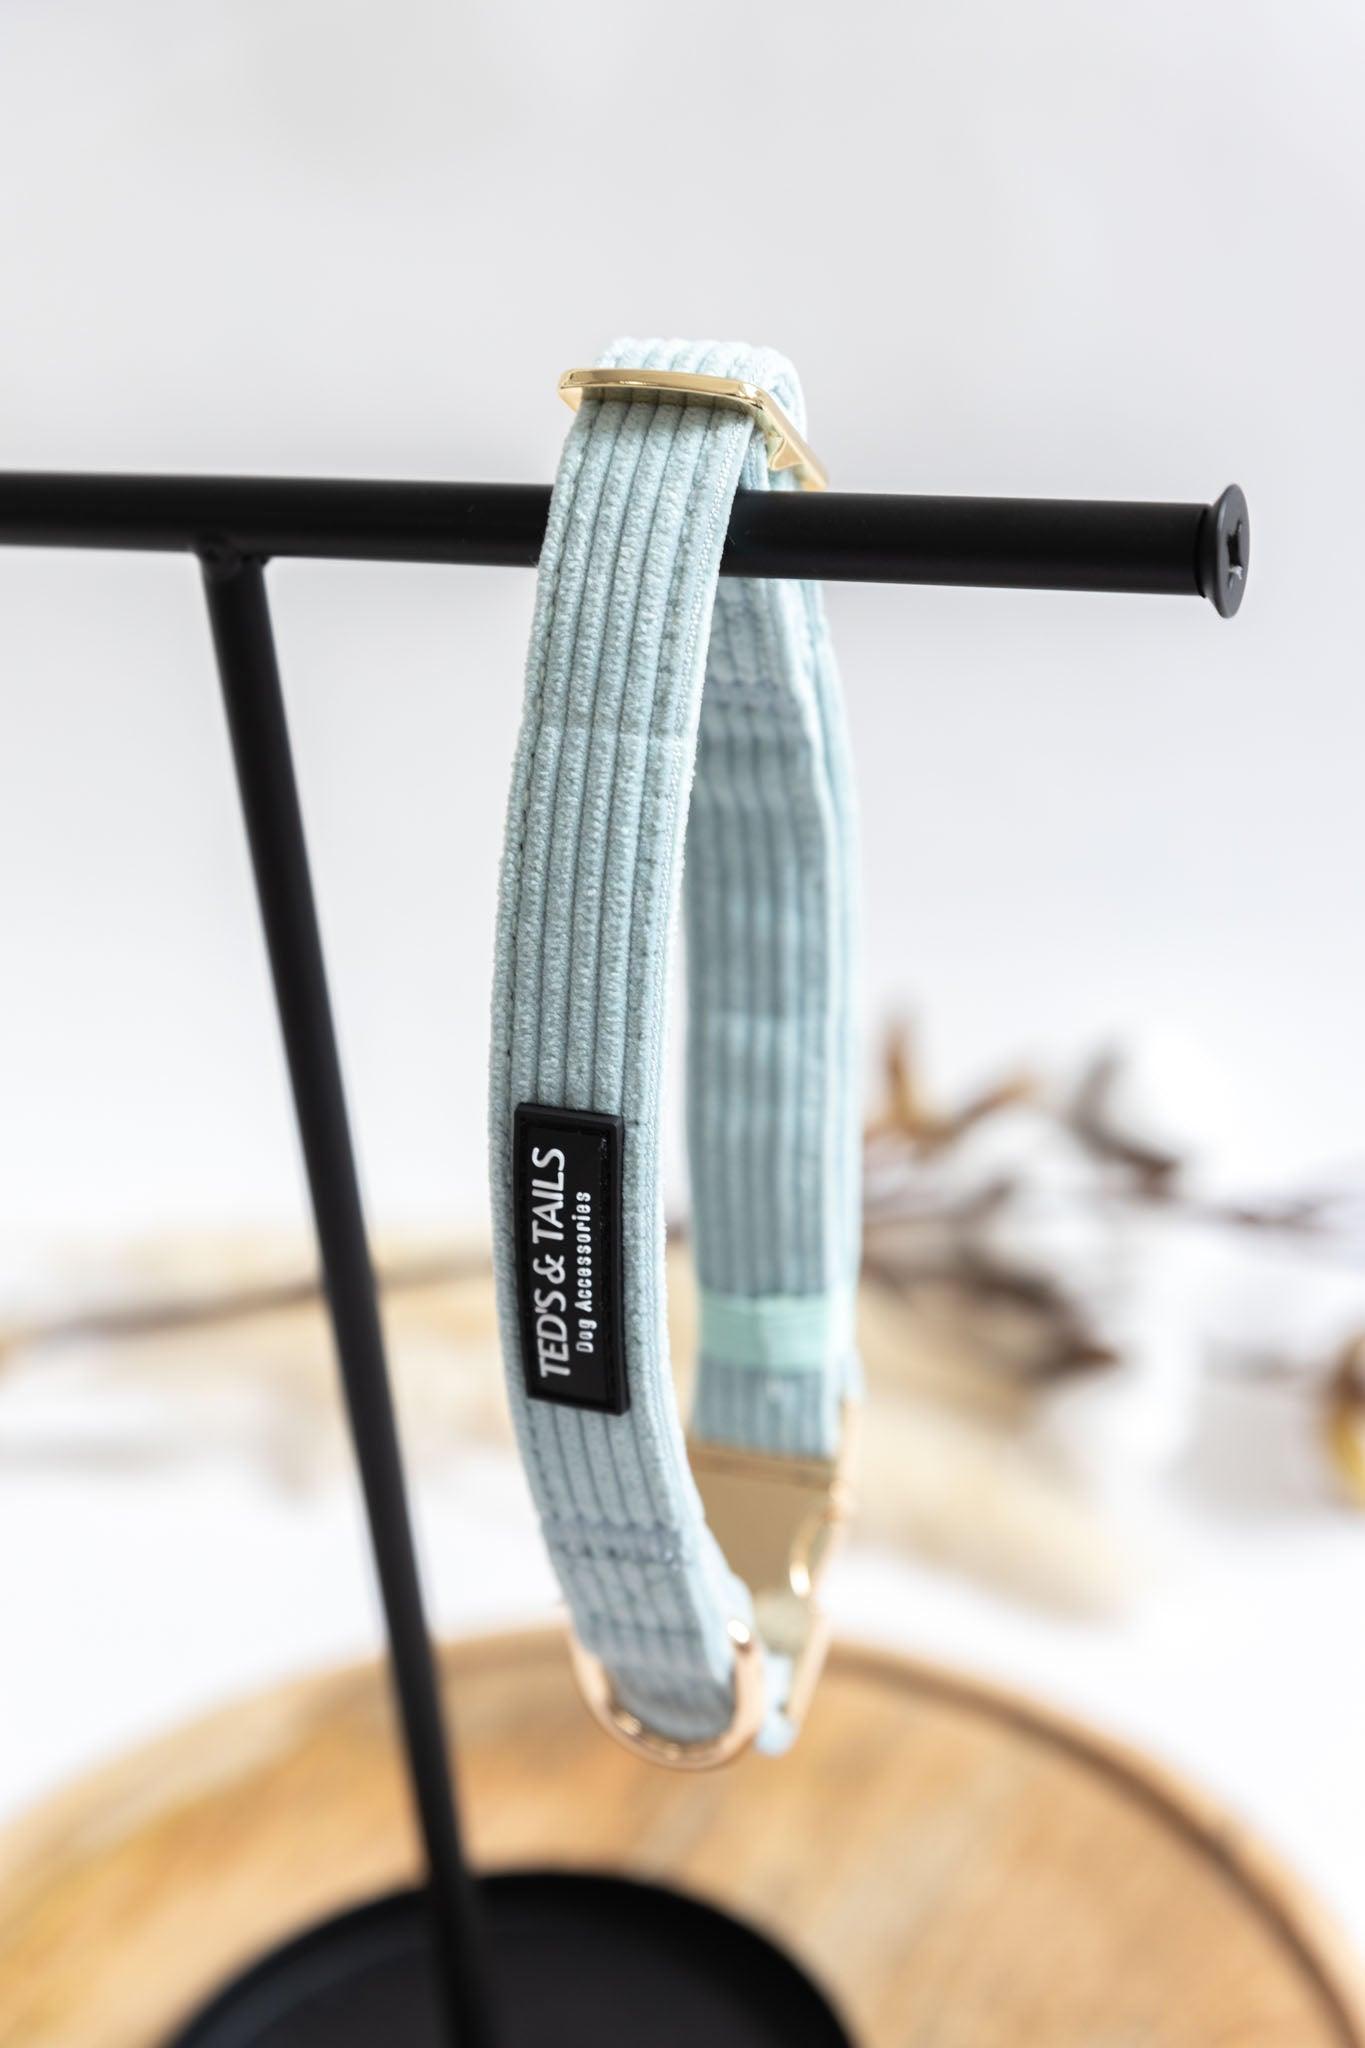 Halsband - Minty may - Ted's and Tails - boetiek, halsbanden, Outfit voor je hond, teds and tails, Vrolijke halsband voor je hond, Vrolijke honden halsband - By Marley